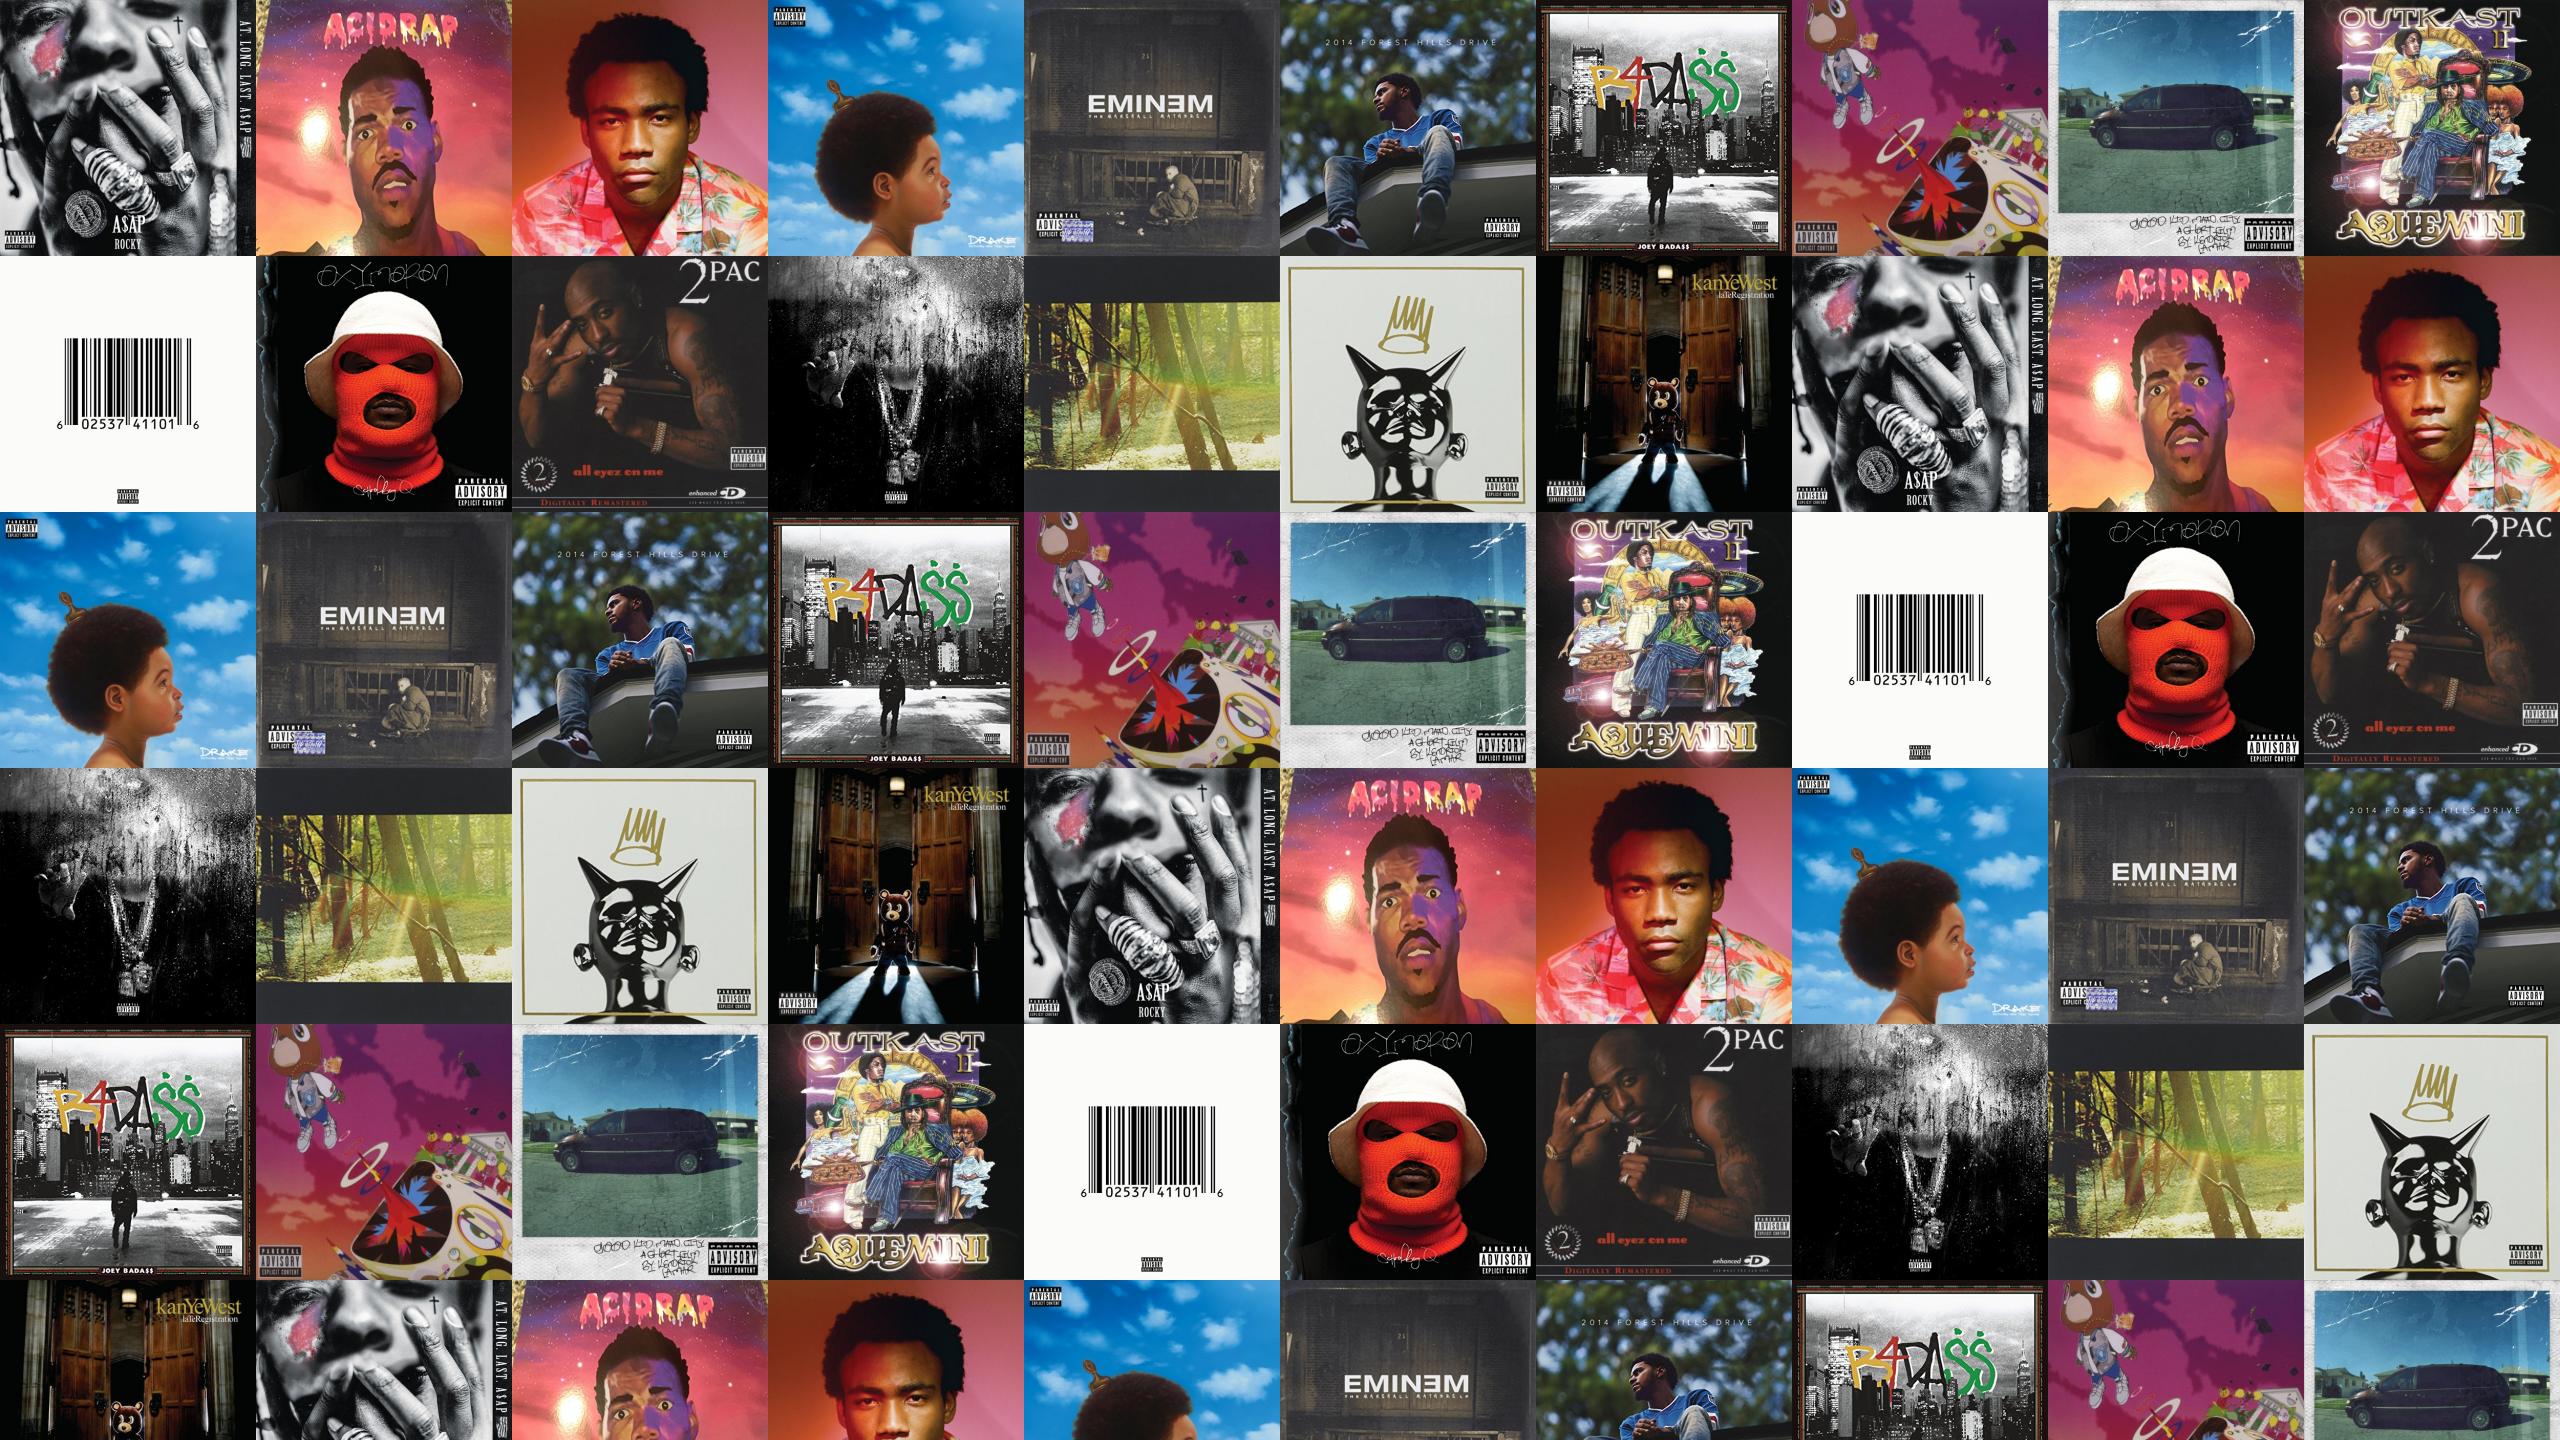 Album Wallpapers  Iphone wallpaper images Cover wallpaper Art collage  wall